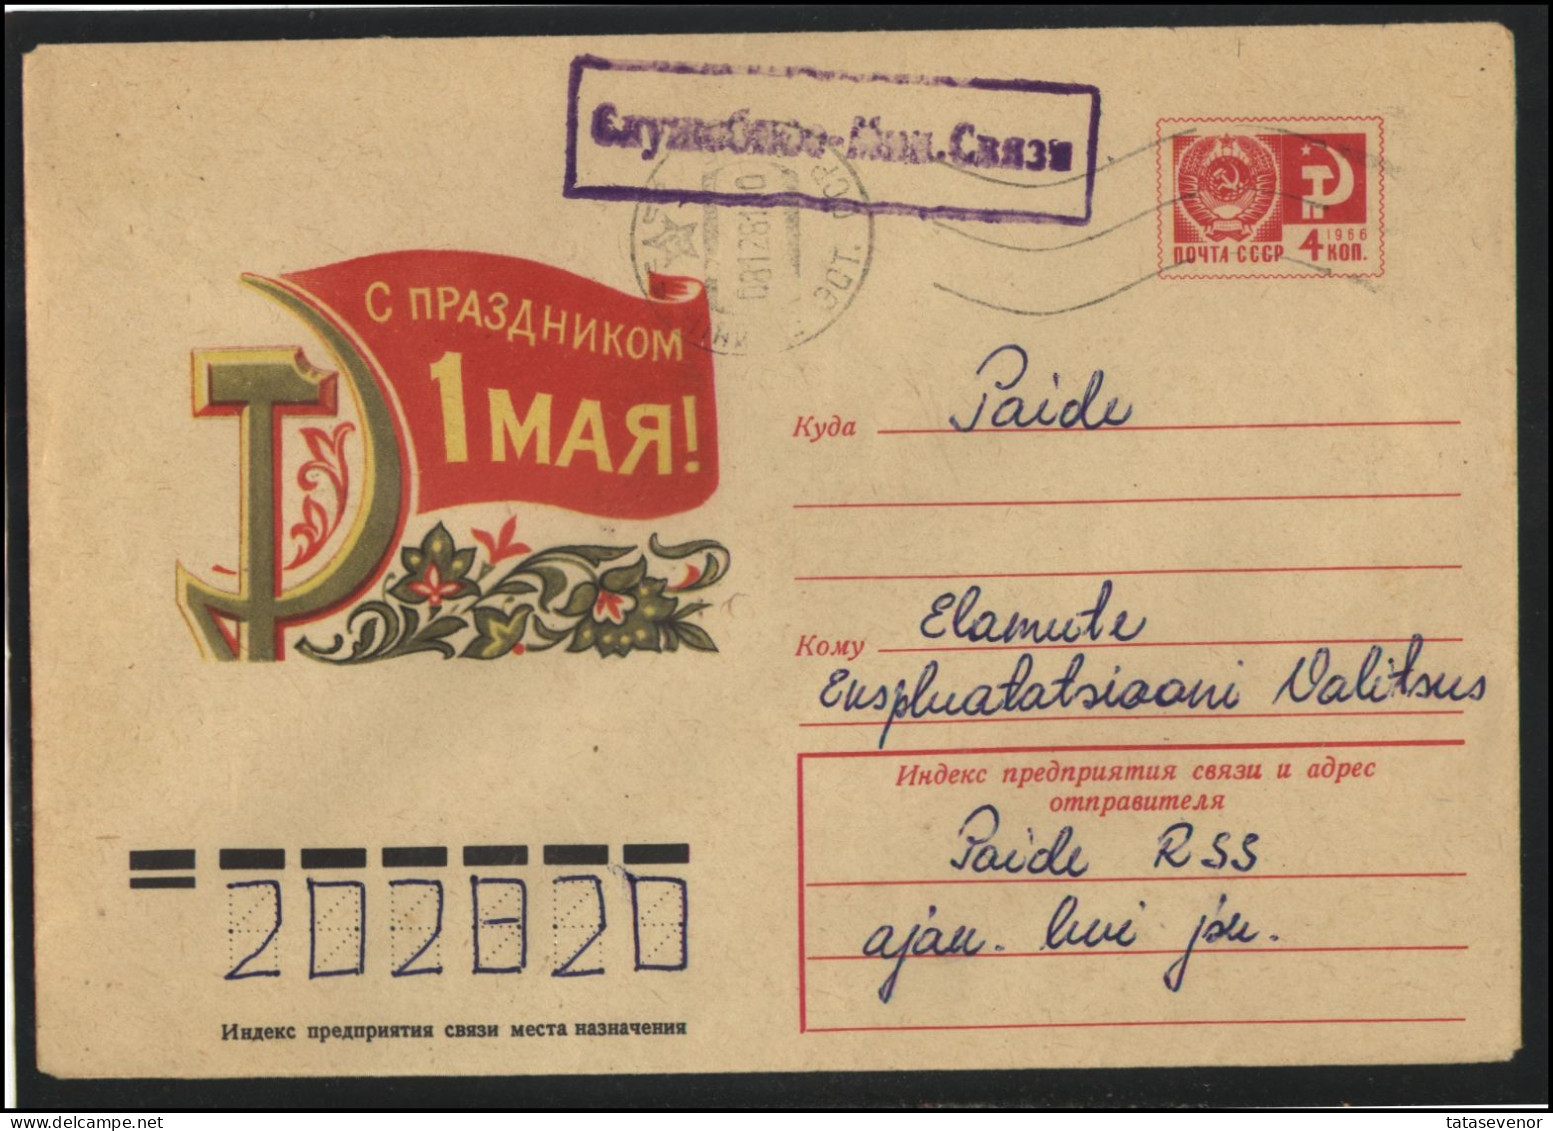 RUSSIA USSR Stationery ESTONIA USED AMBL 1380 PAIDE May Day Celebration - Ohne Zuordnung